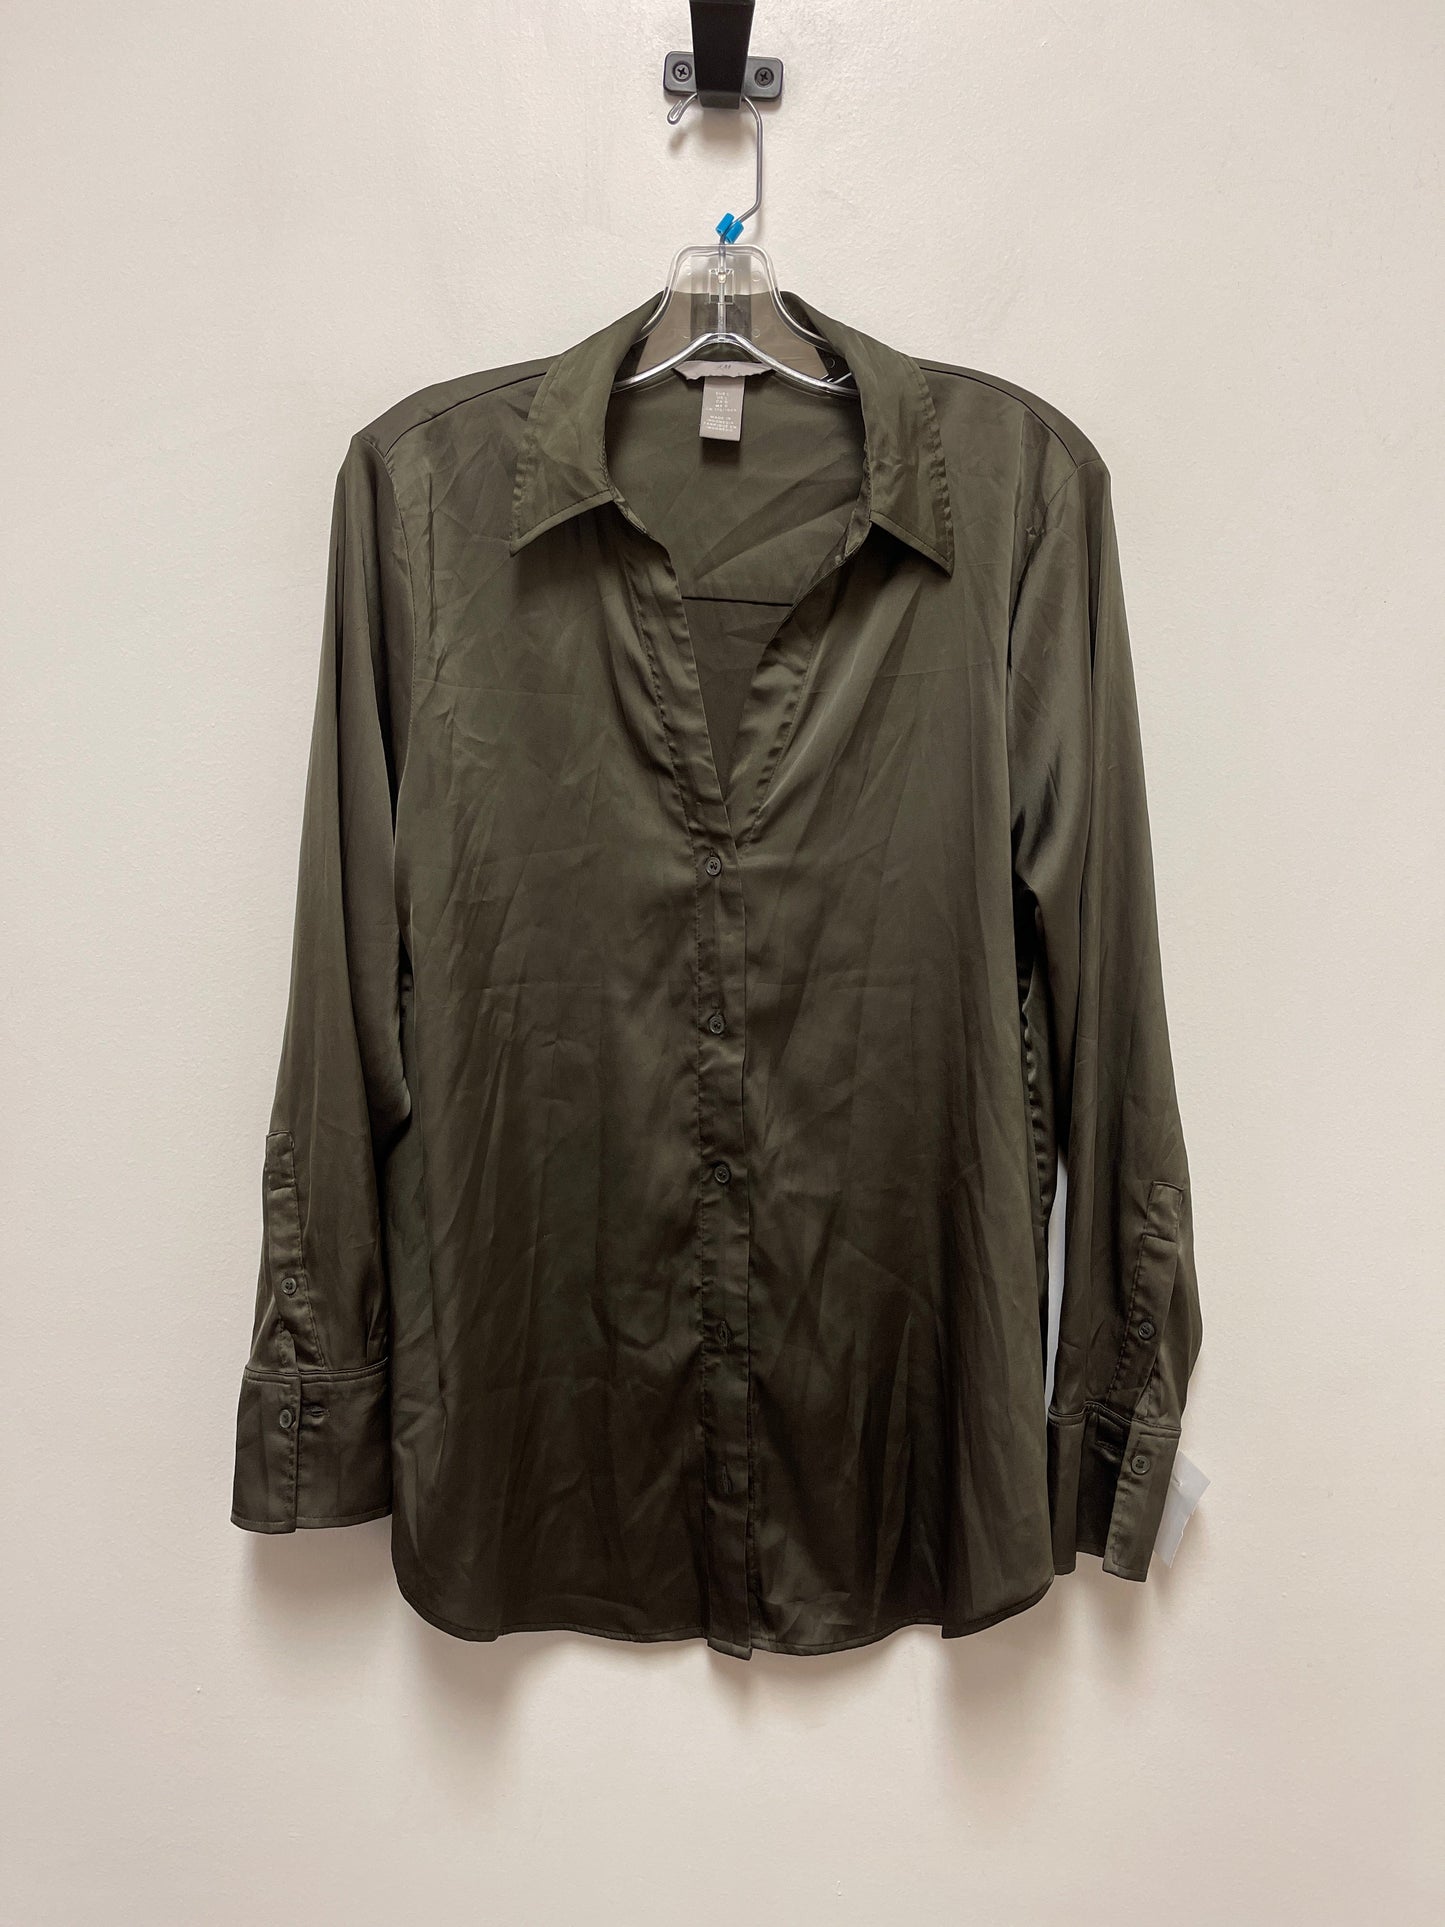 Green Top Long Sleeve H&m, Size L